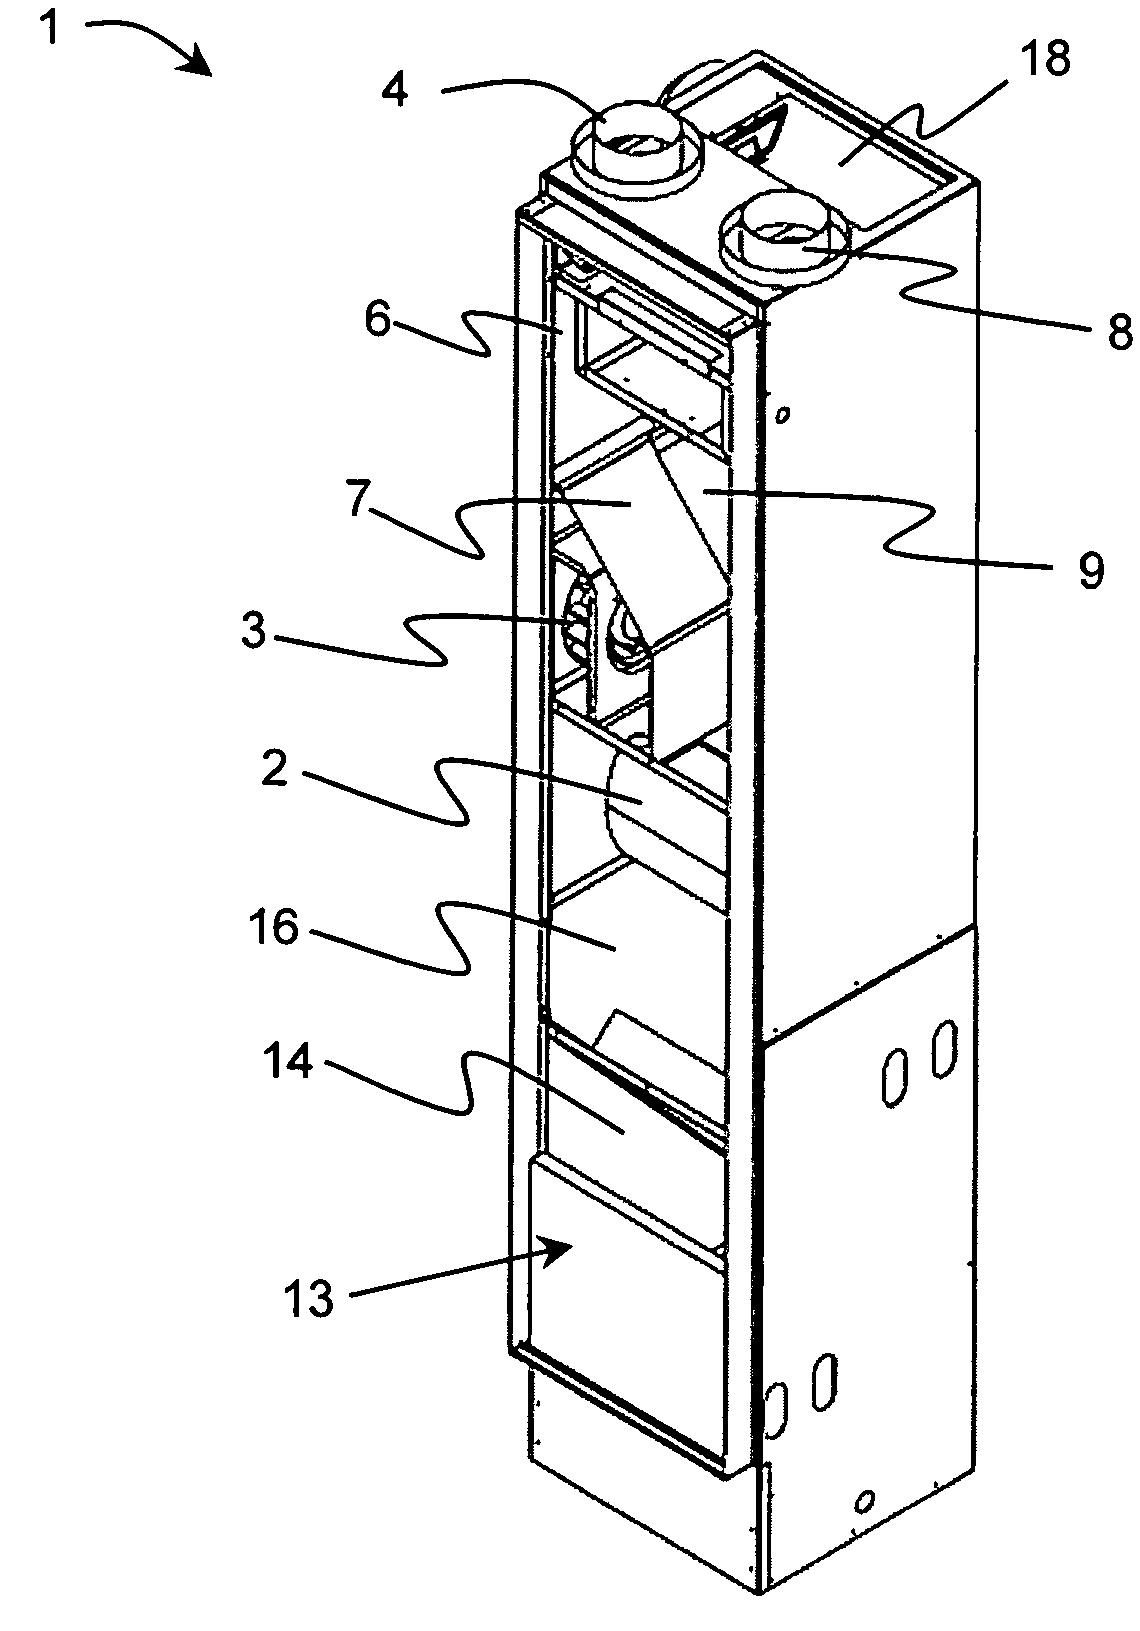 Heat recovery ventilator with defrost